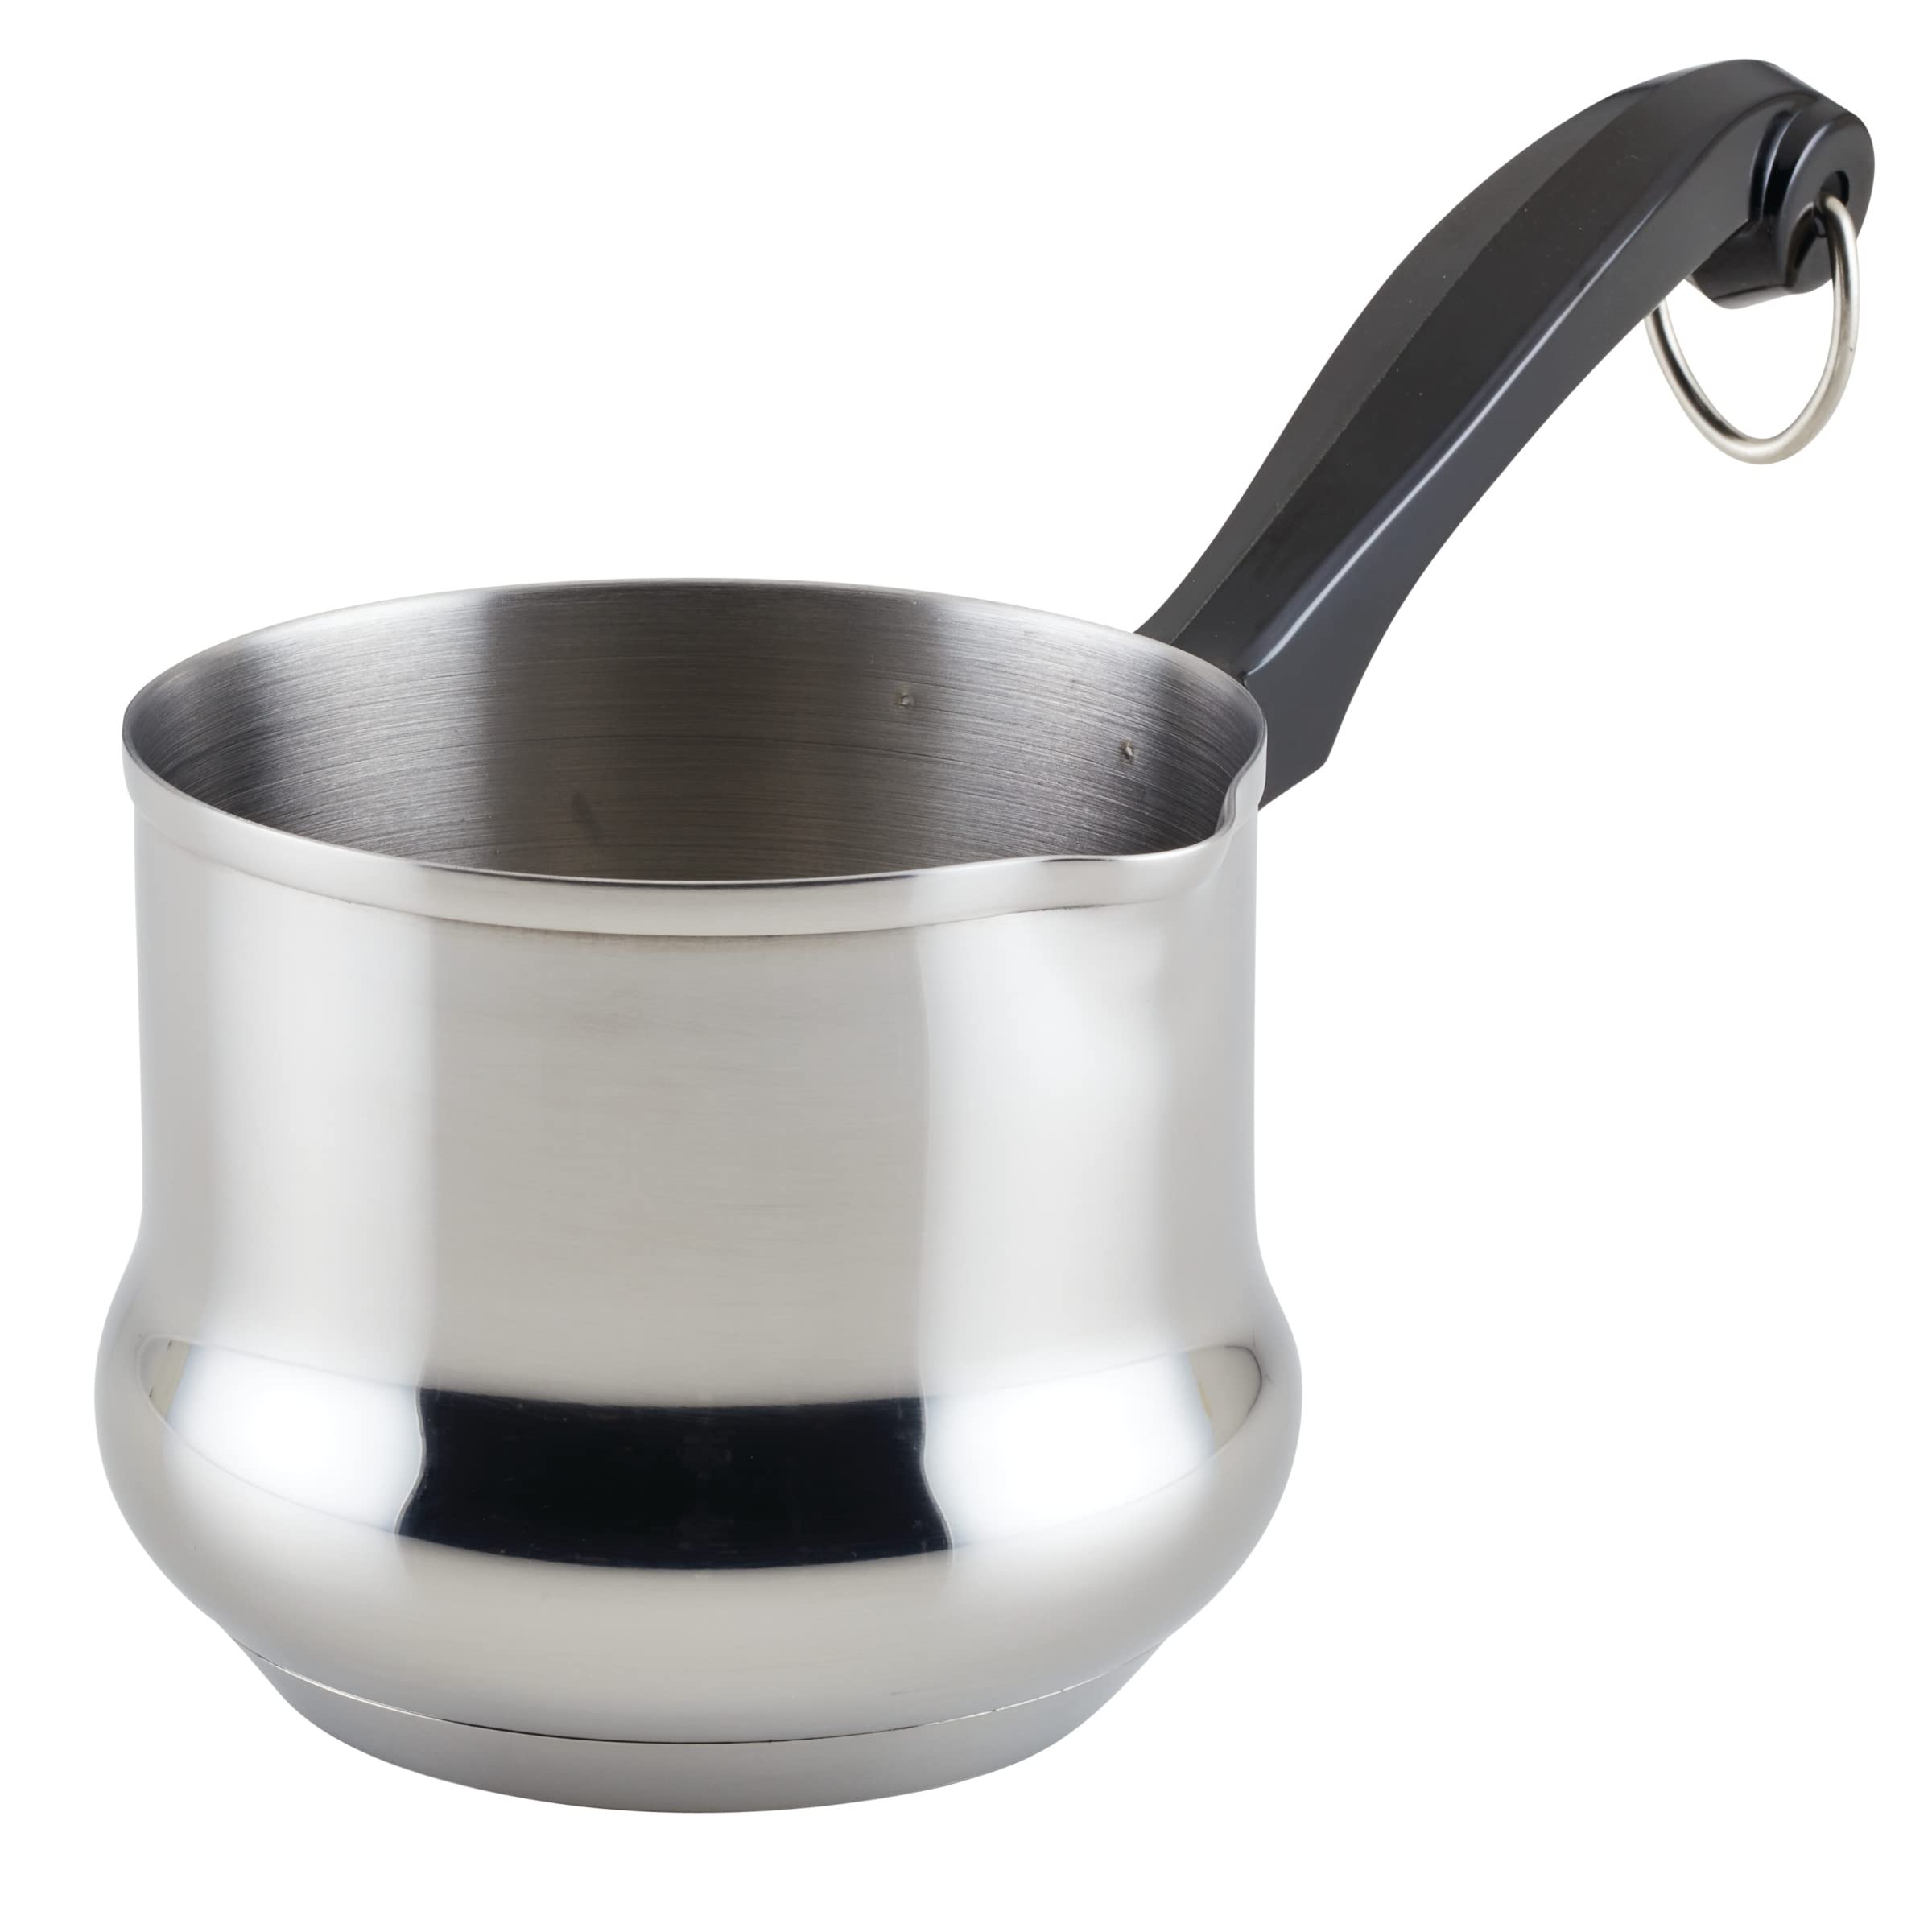 Farberware Classic Series Stainless Steel Butter Warmer/Small Saucepan Dishwasher Safe